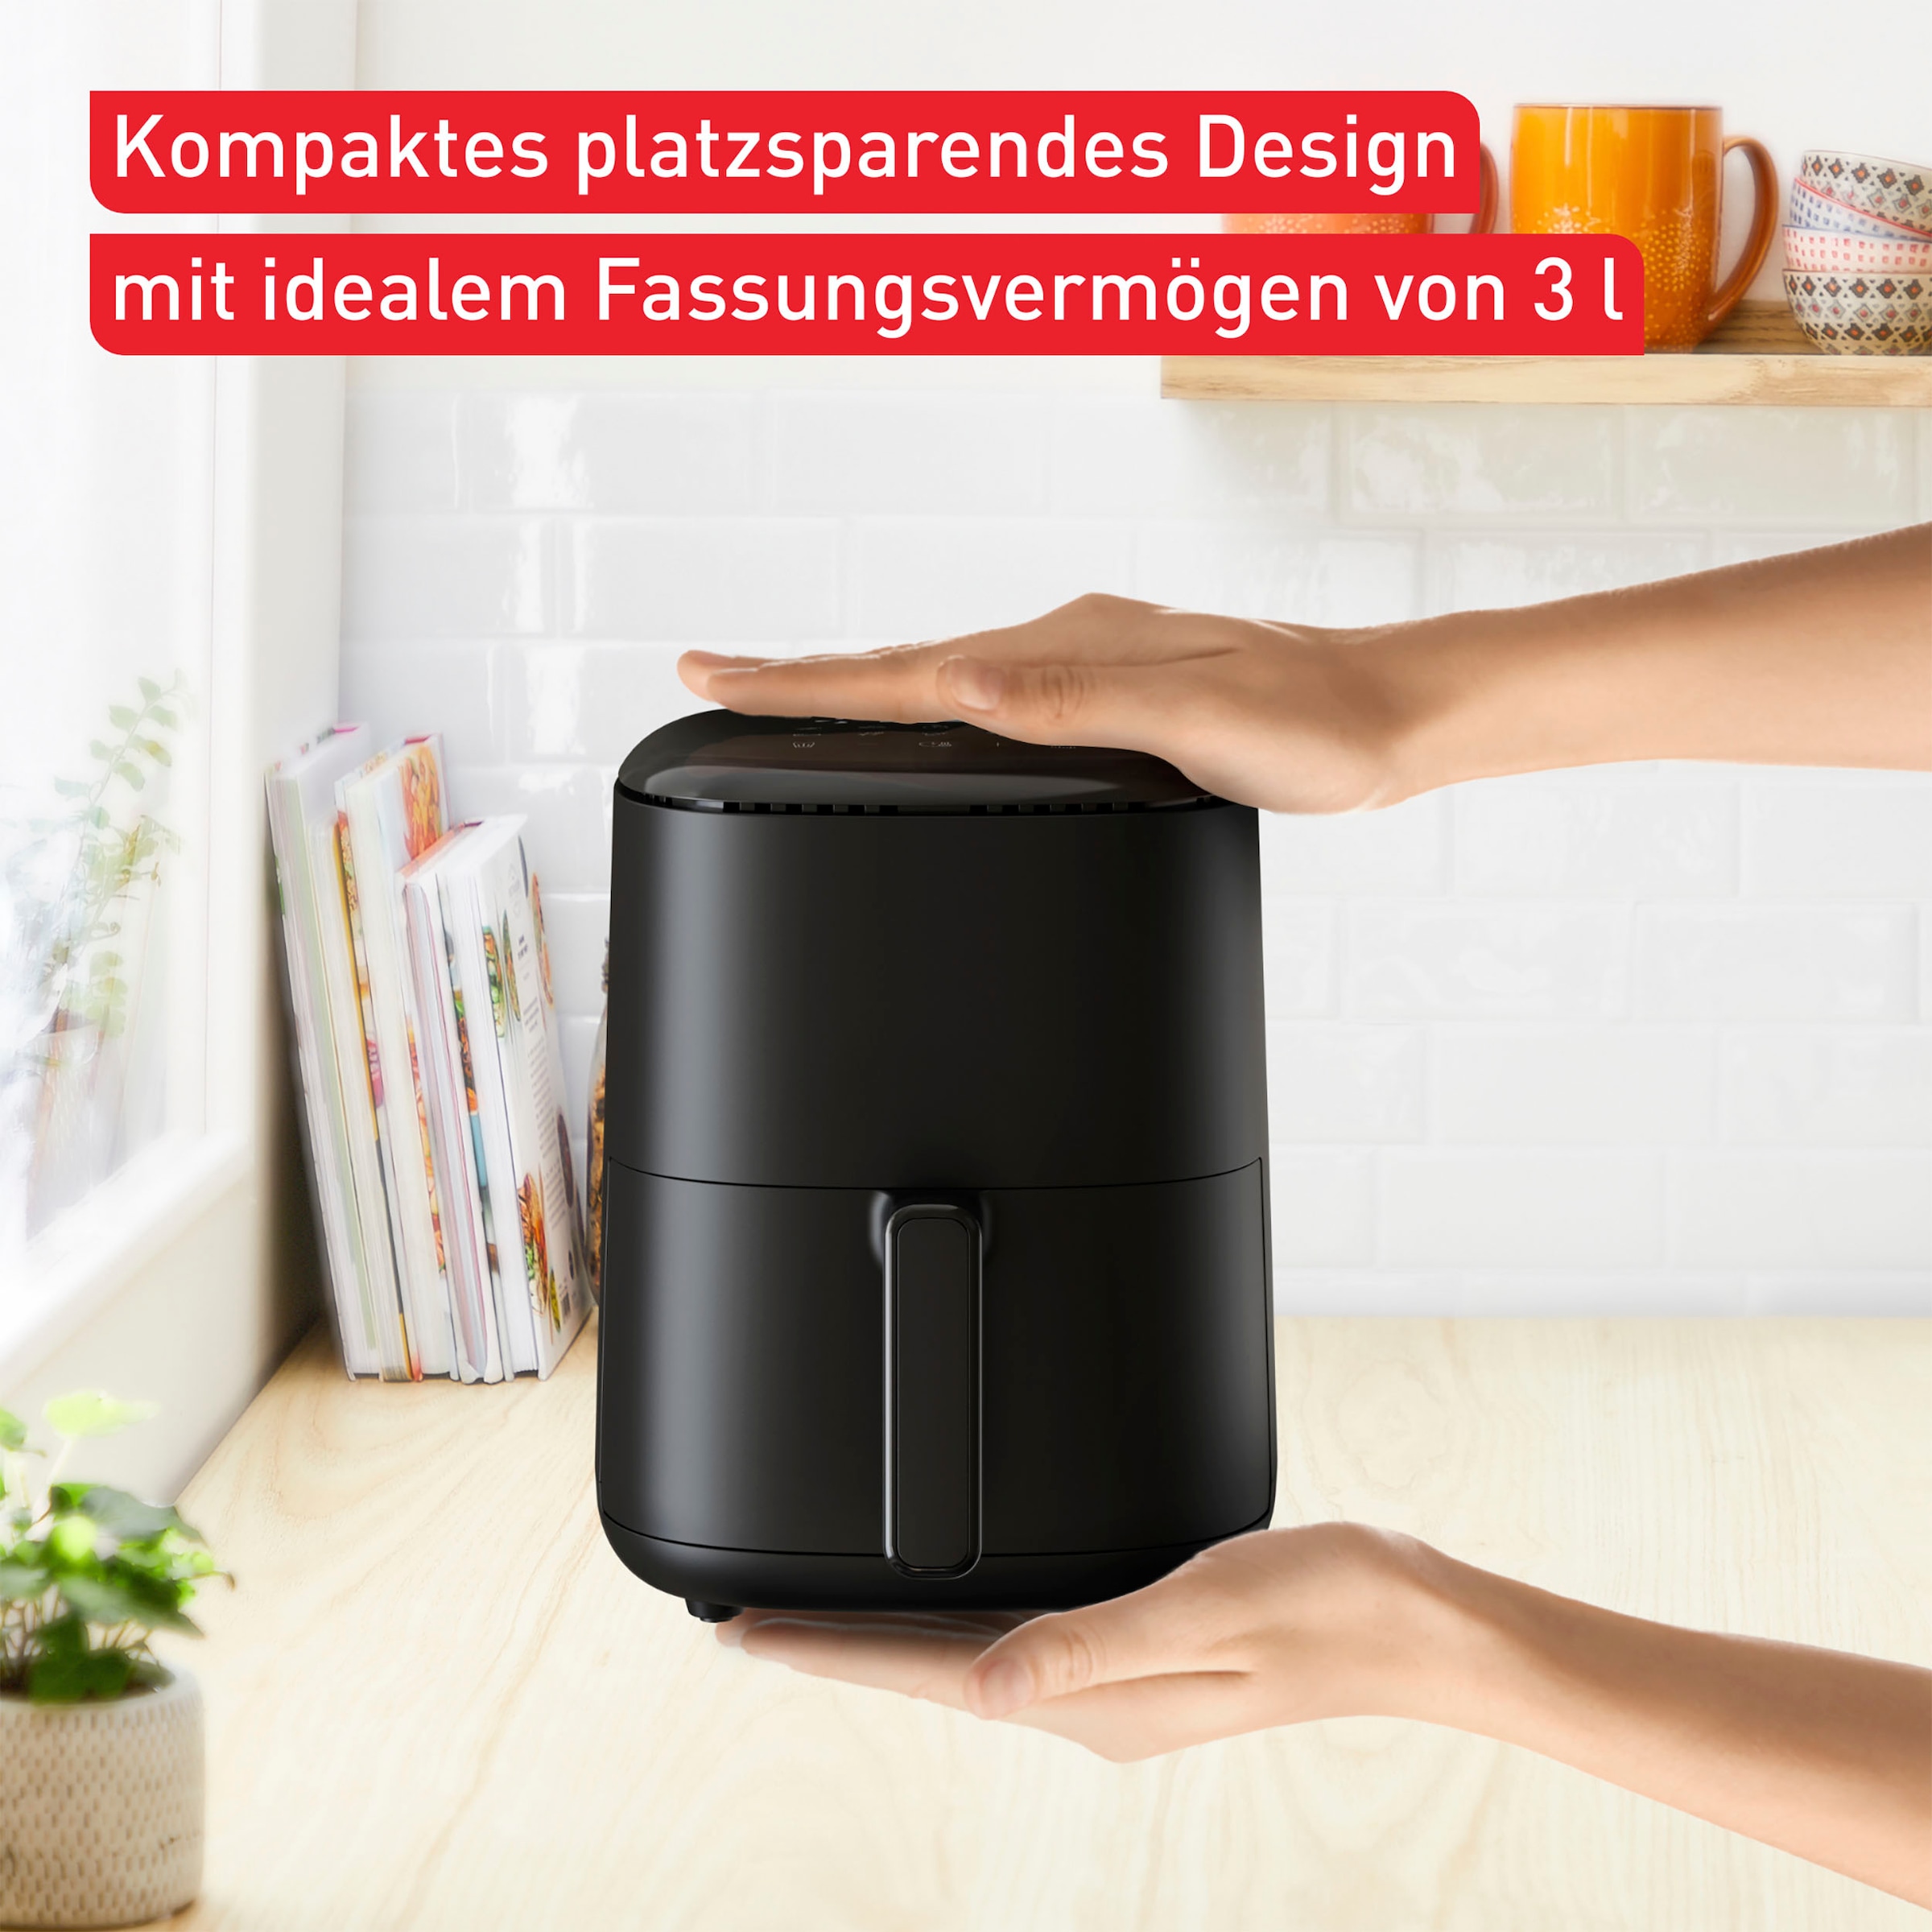 Tefal Easy 1300 Shop Online »EY1458 Compact«, W Fry Heißluftfritteuse im OTTO